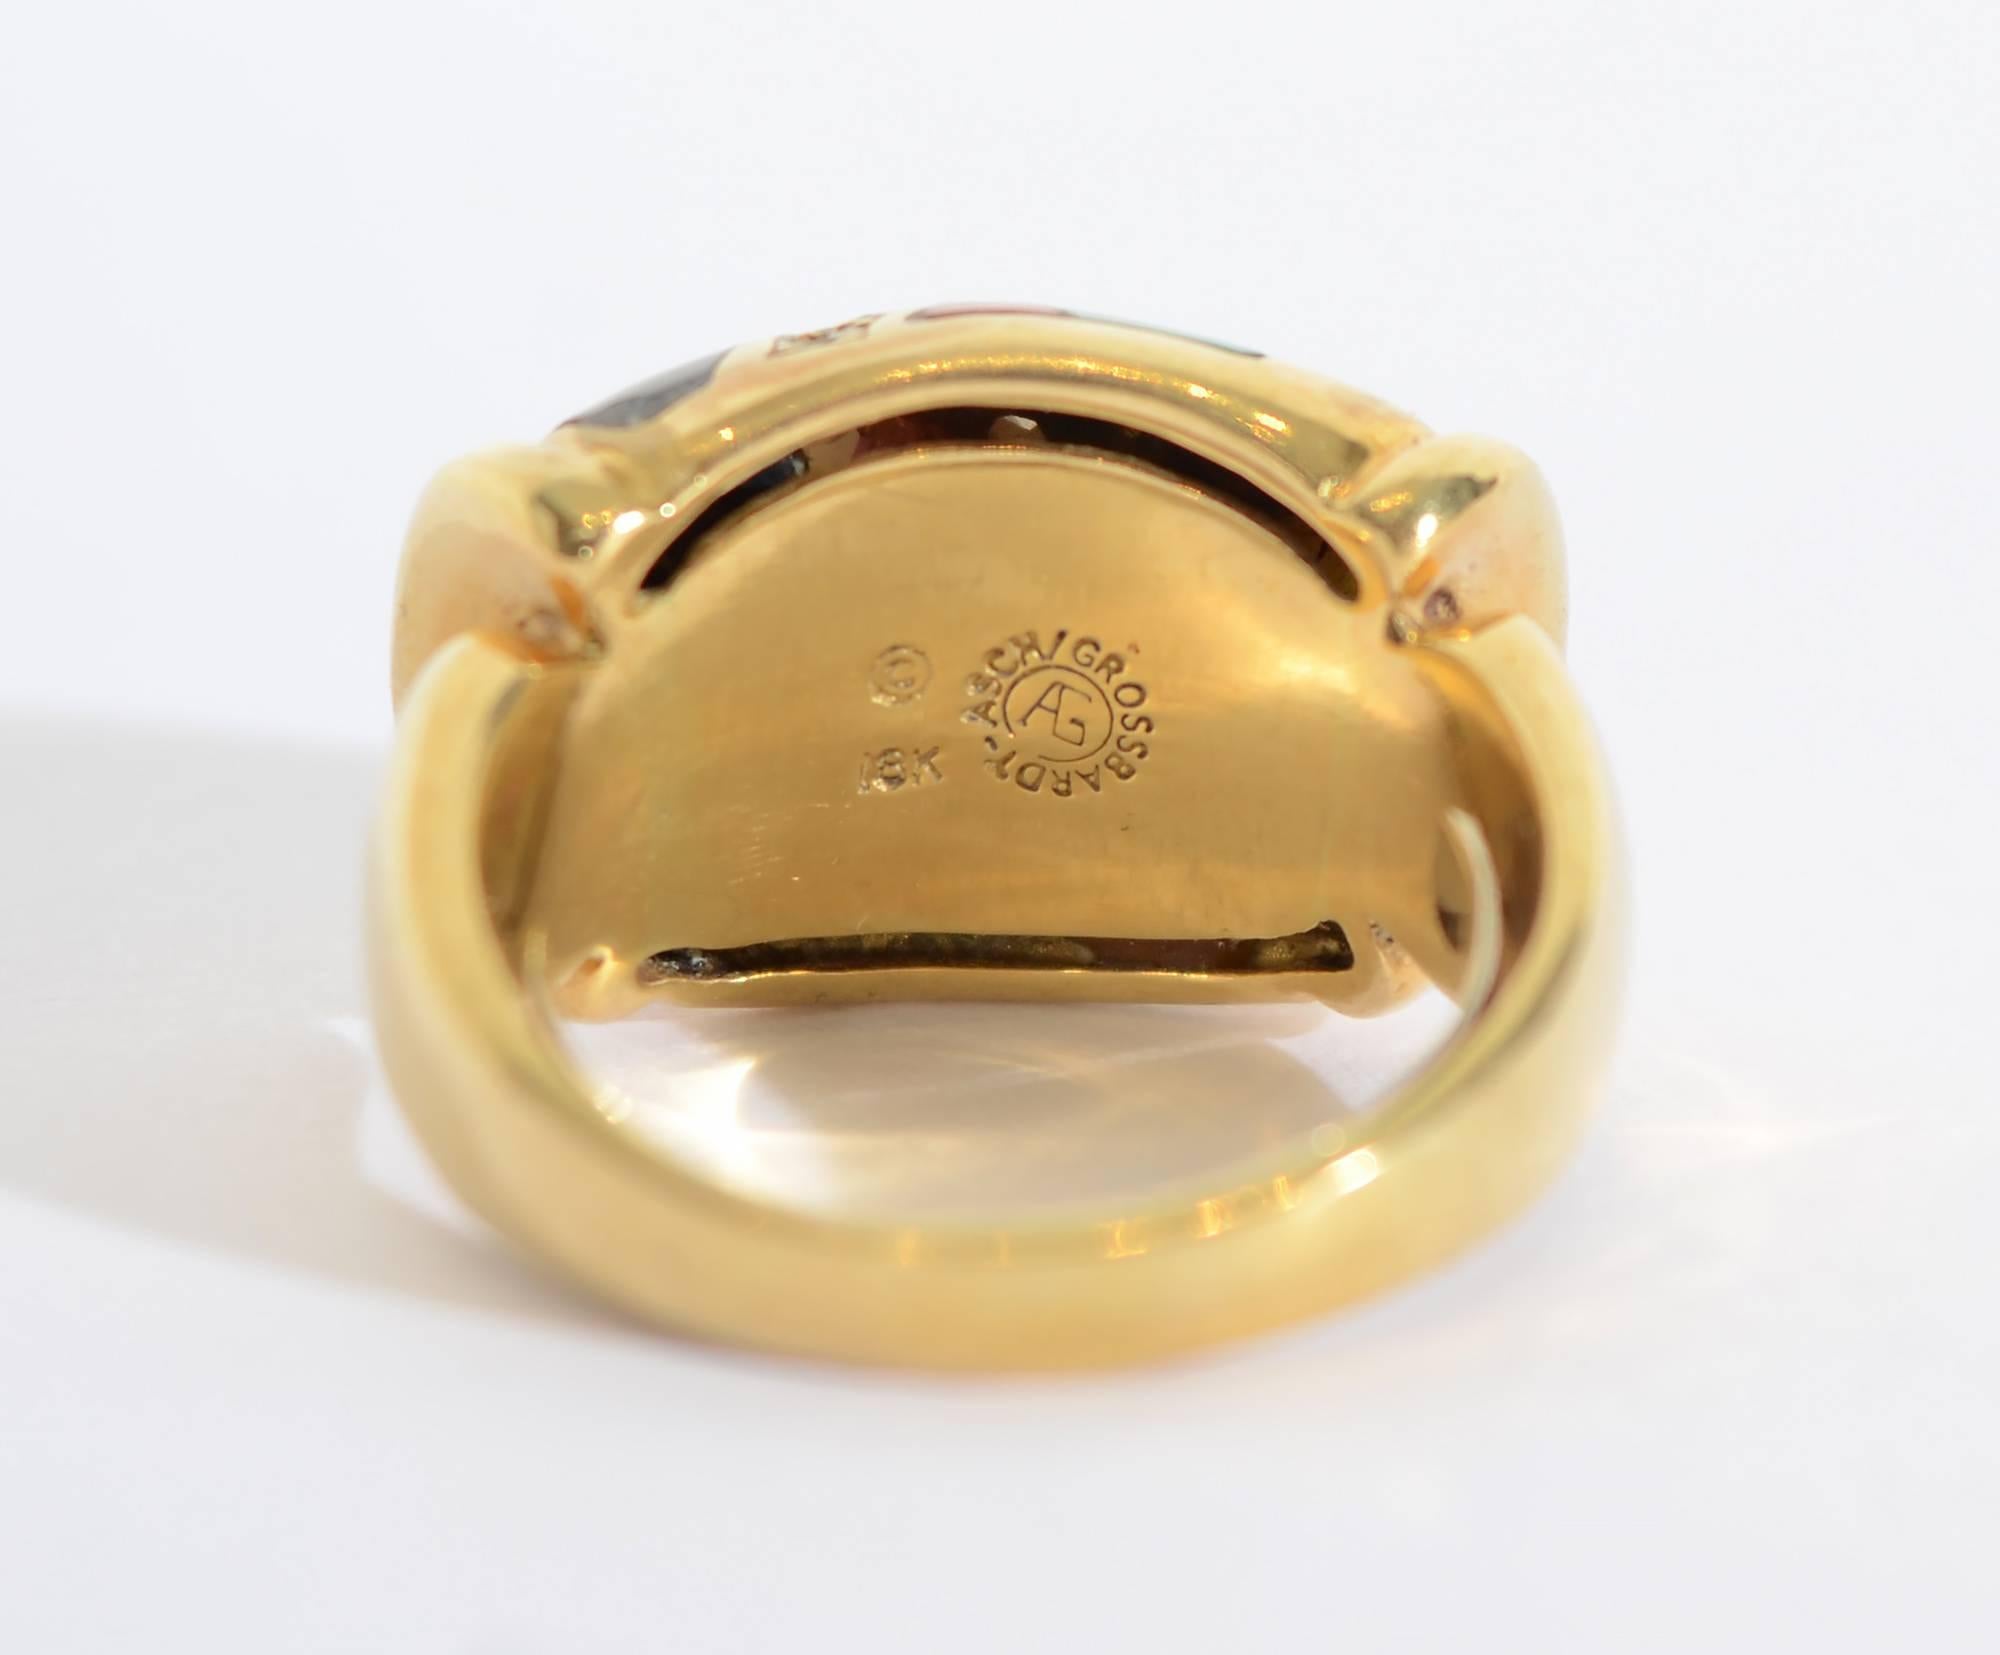 Women's or Men's Asch Grossbardt Gold Ring with Inlaid Stones